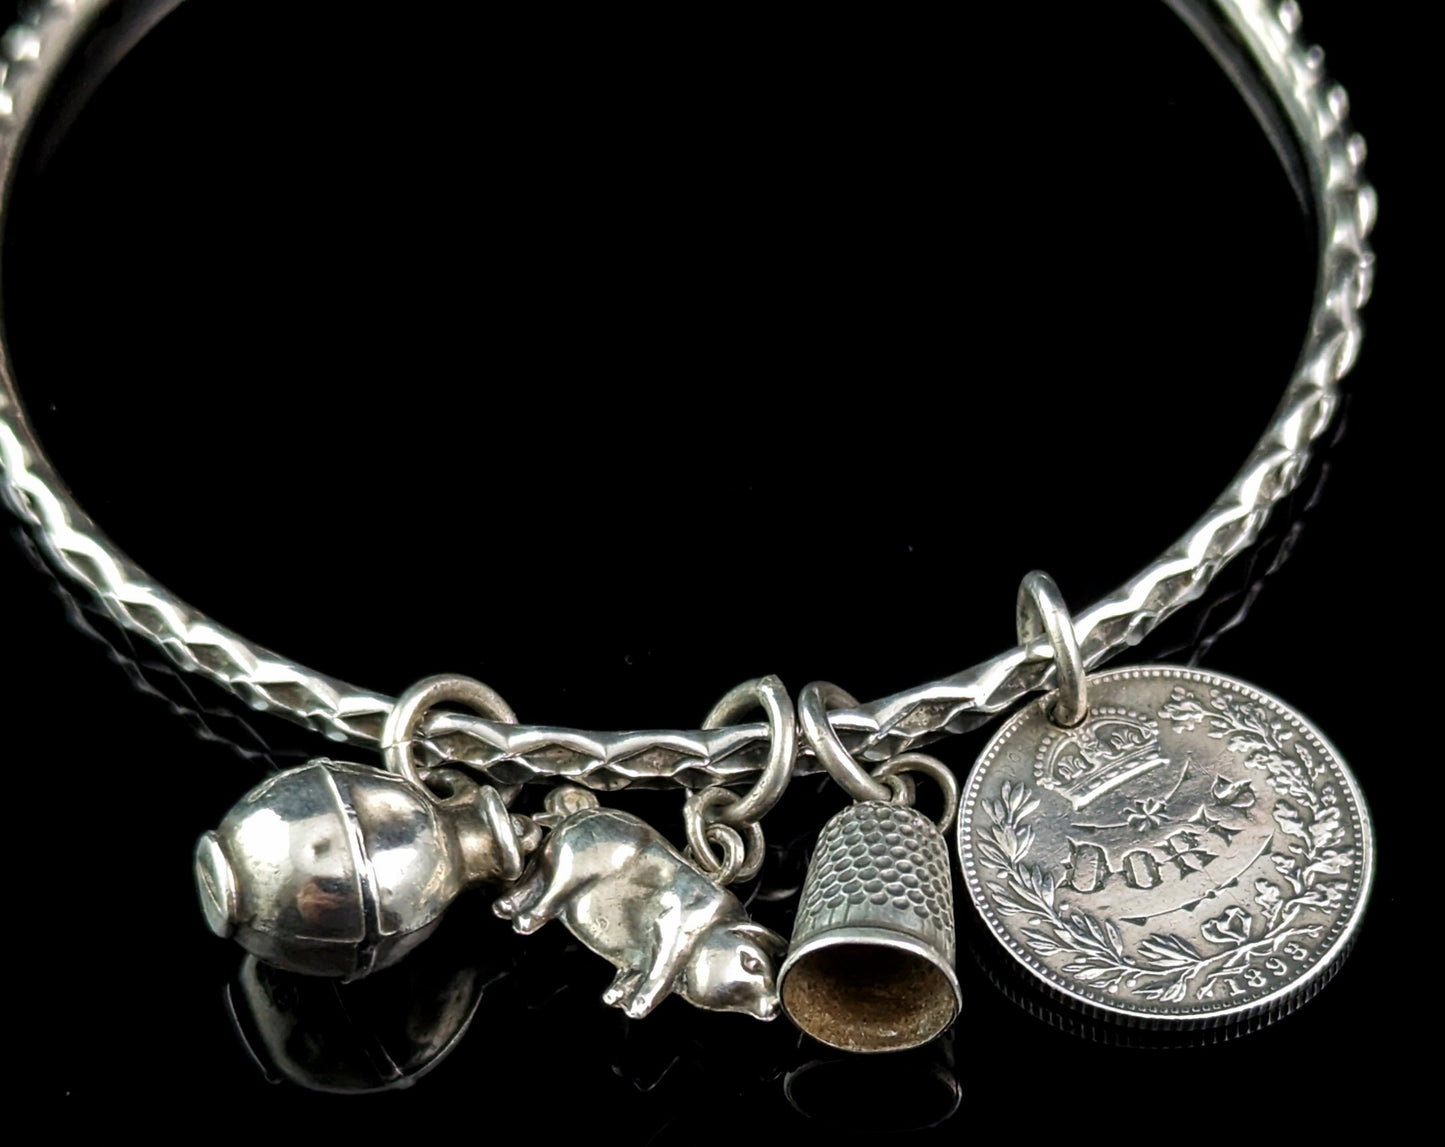 Antique sterling silver charm bangle, bracelet, lucky charms